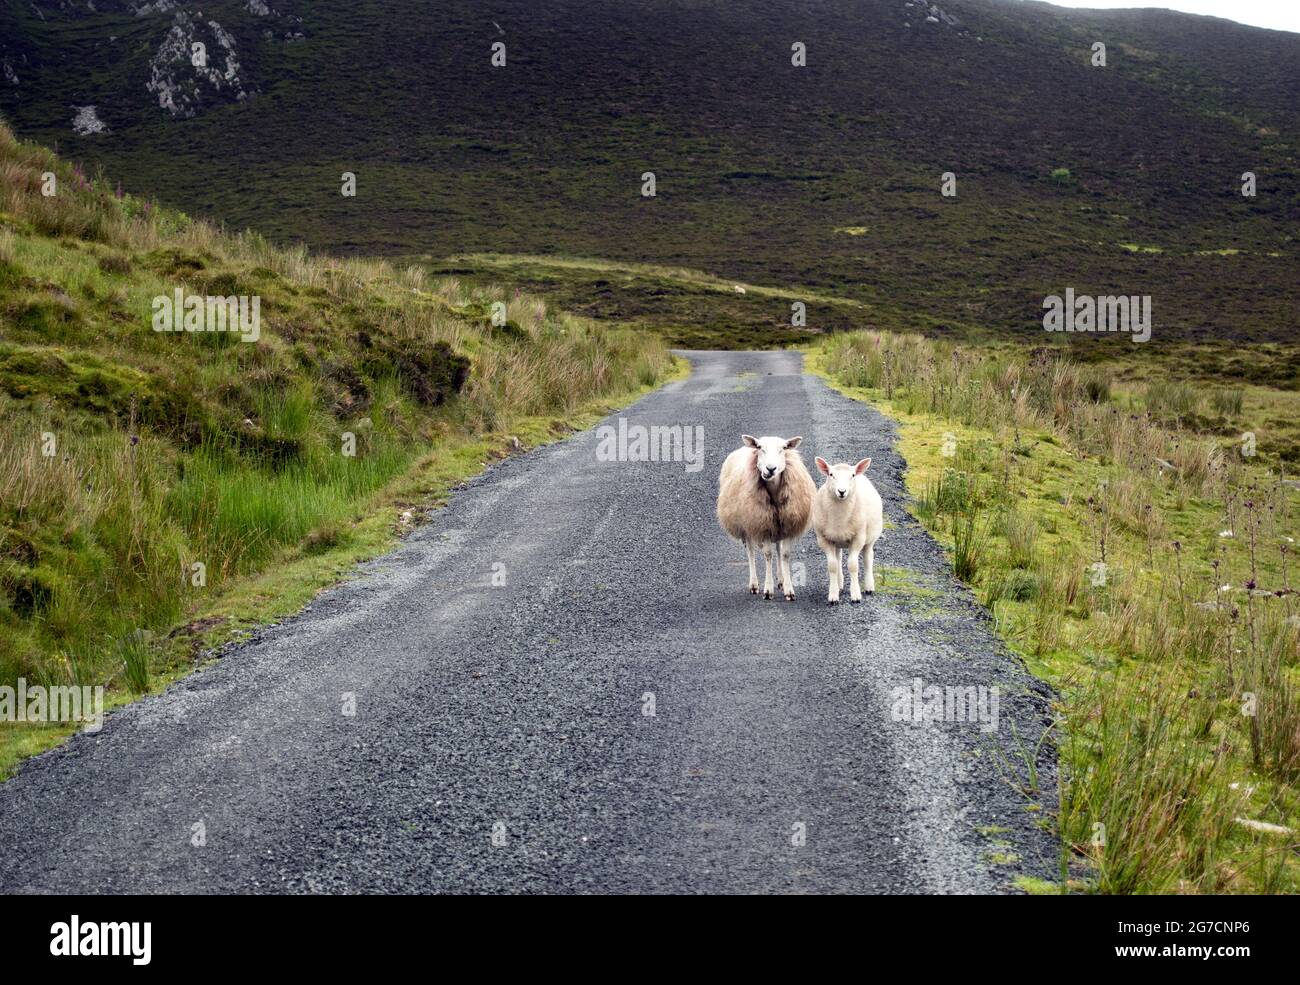 Two sheeps on the roud in Lergadaghtan mountains, Co, Donegal, Ireland, Stock Photo